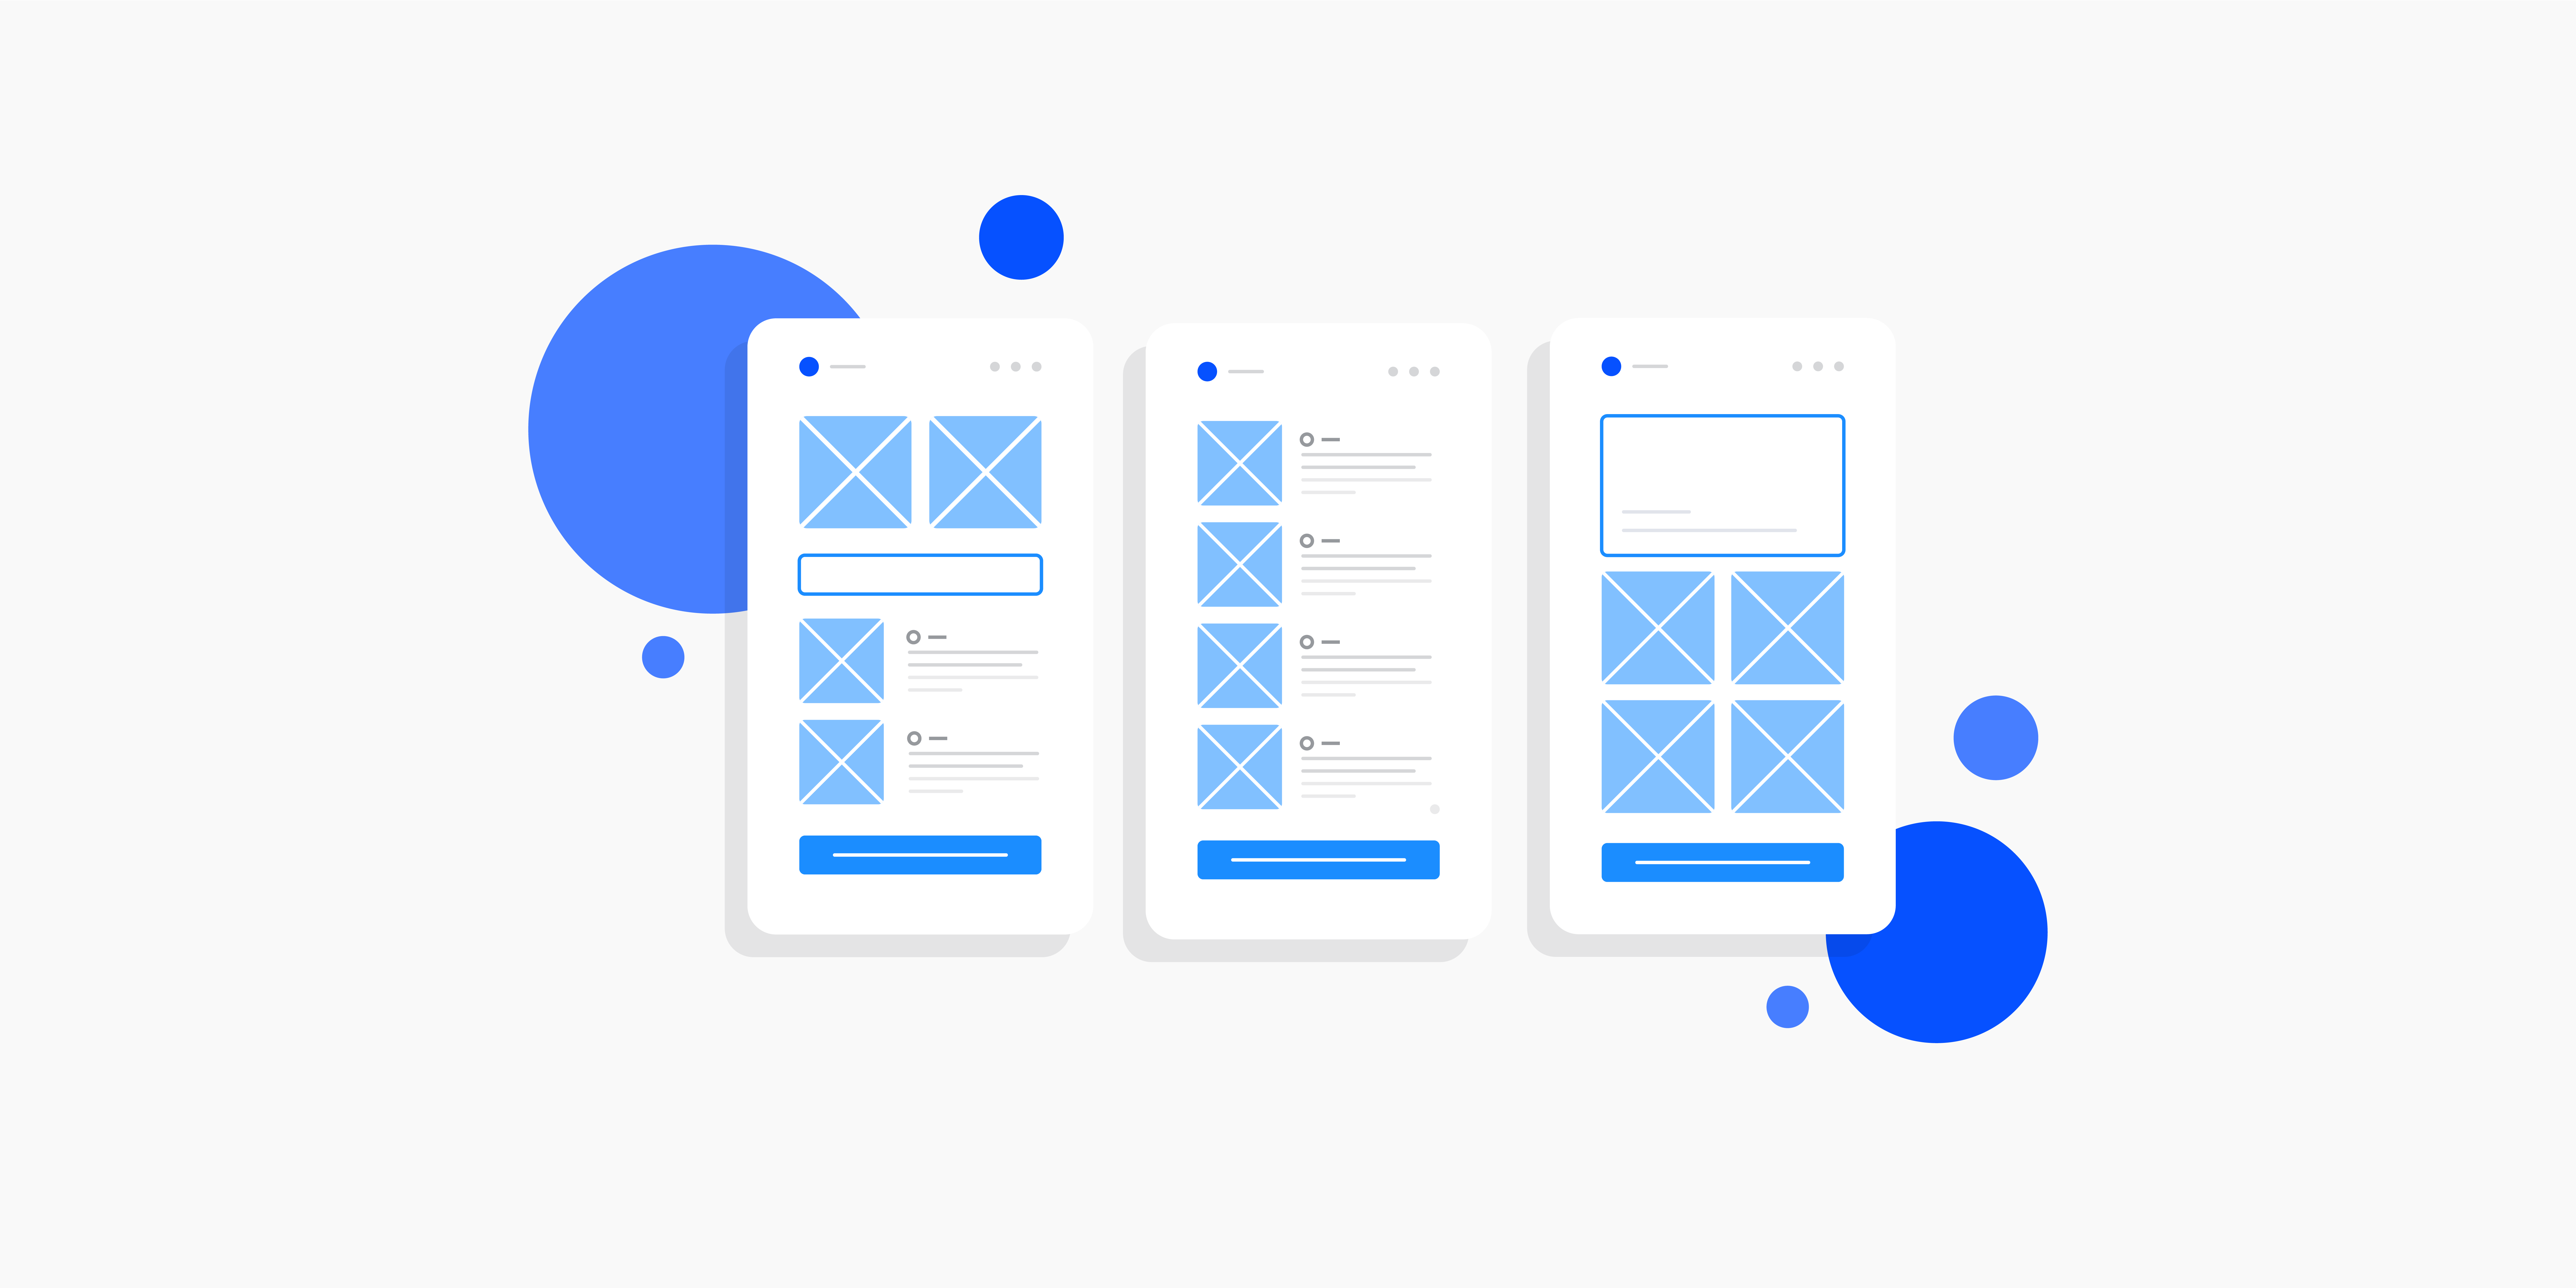 The ultimate guide to mobile app design illustration.